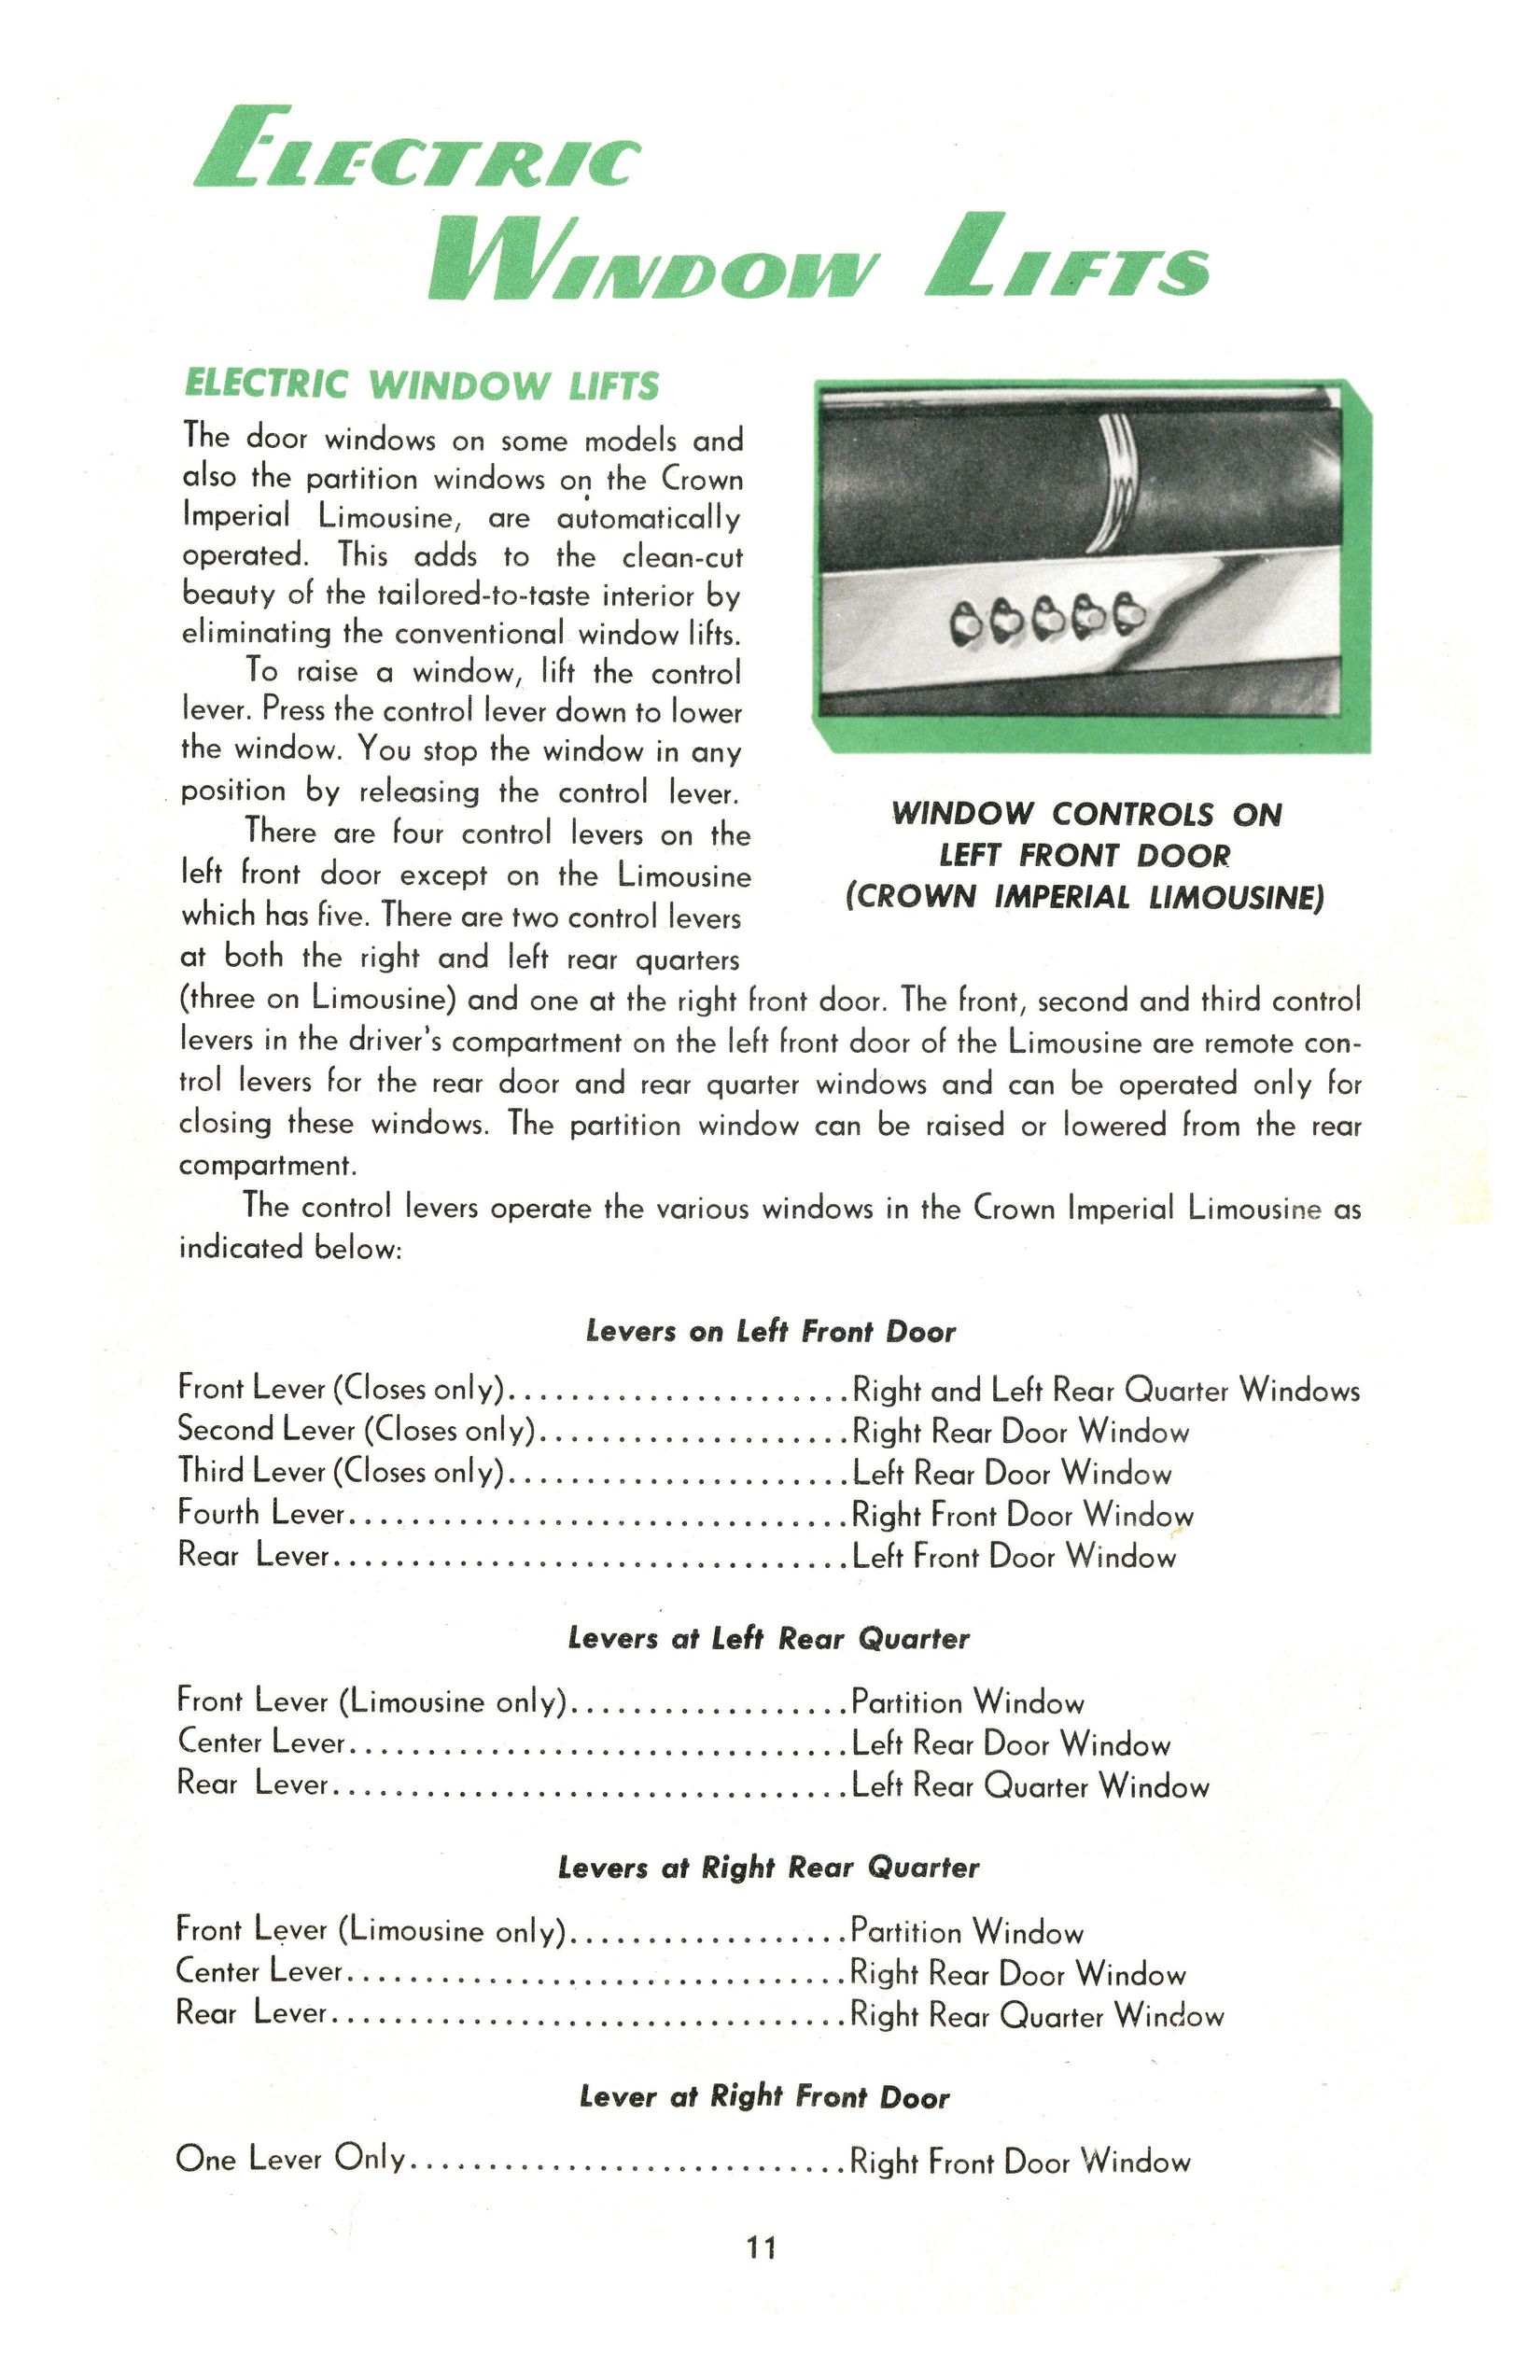 1951 Chrysler Saratoga New York Imperial Manual Page 8